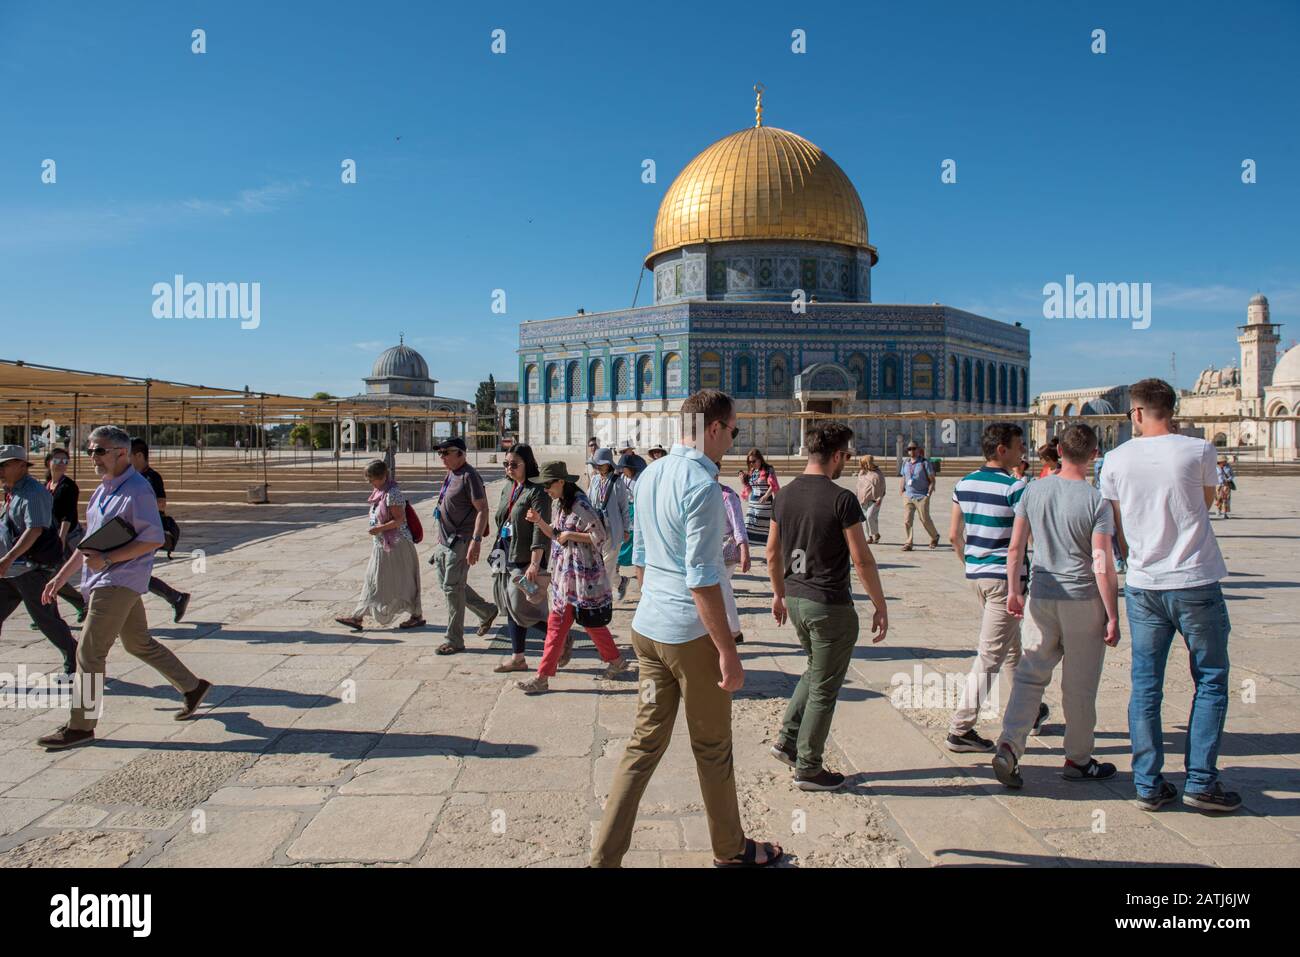 JERUSALEM, ISRAEL - MAY 16, 2018: Non muslim tourists visiting the Dome of the Rock Islamic Shrine on the Temple Mount in the Old city of Jerusalem, P Stock Photo